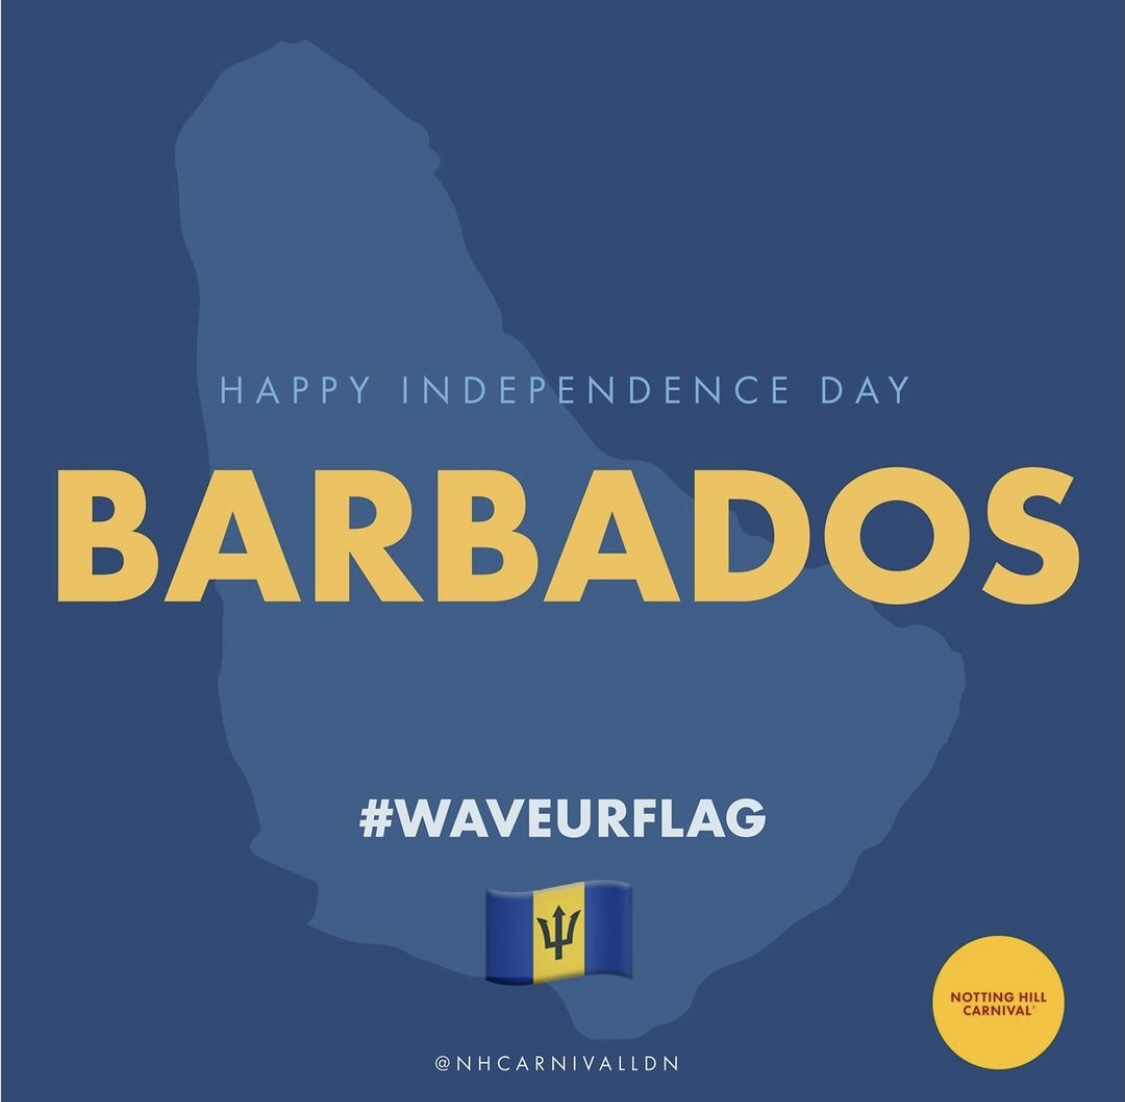 Happy Independence Day Barbados! Wave your flags! 🇧🇧🇧🇧🇧🇧🇧🇧🇧🇧 #NHC #NottingHillCarnival #Barbados #IndependenceDay #CaribbeanIndependence #Caribbean #WaveYourFlags